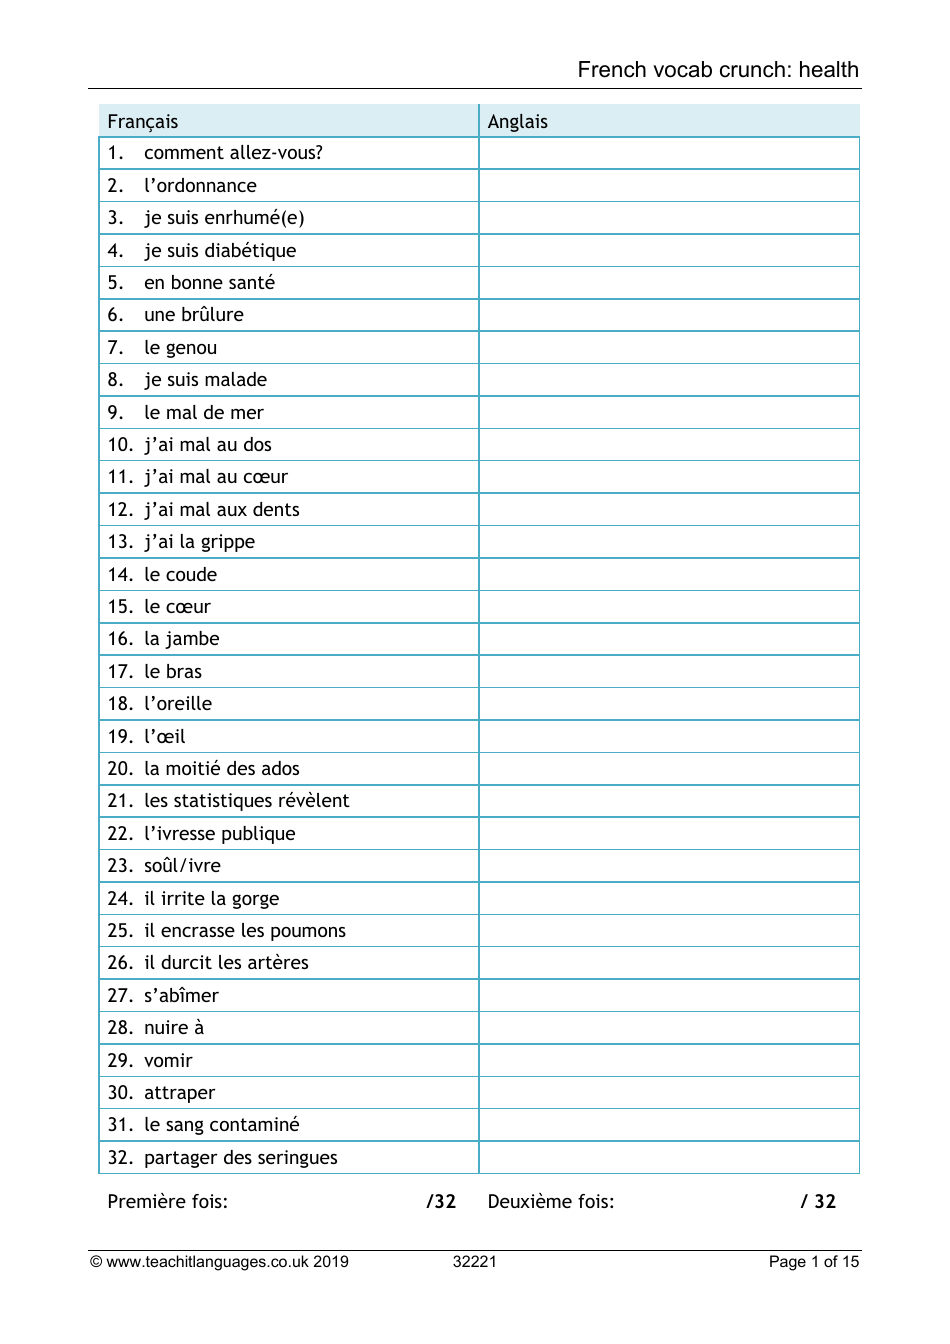 French Vocab Crunch Flashcards - Health (English / French), Page 1